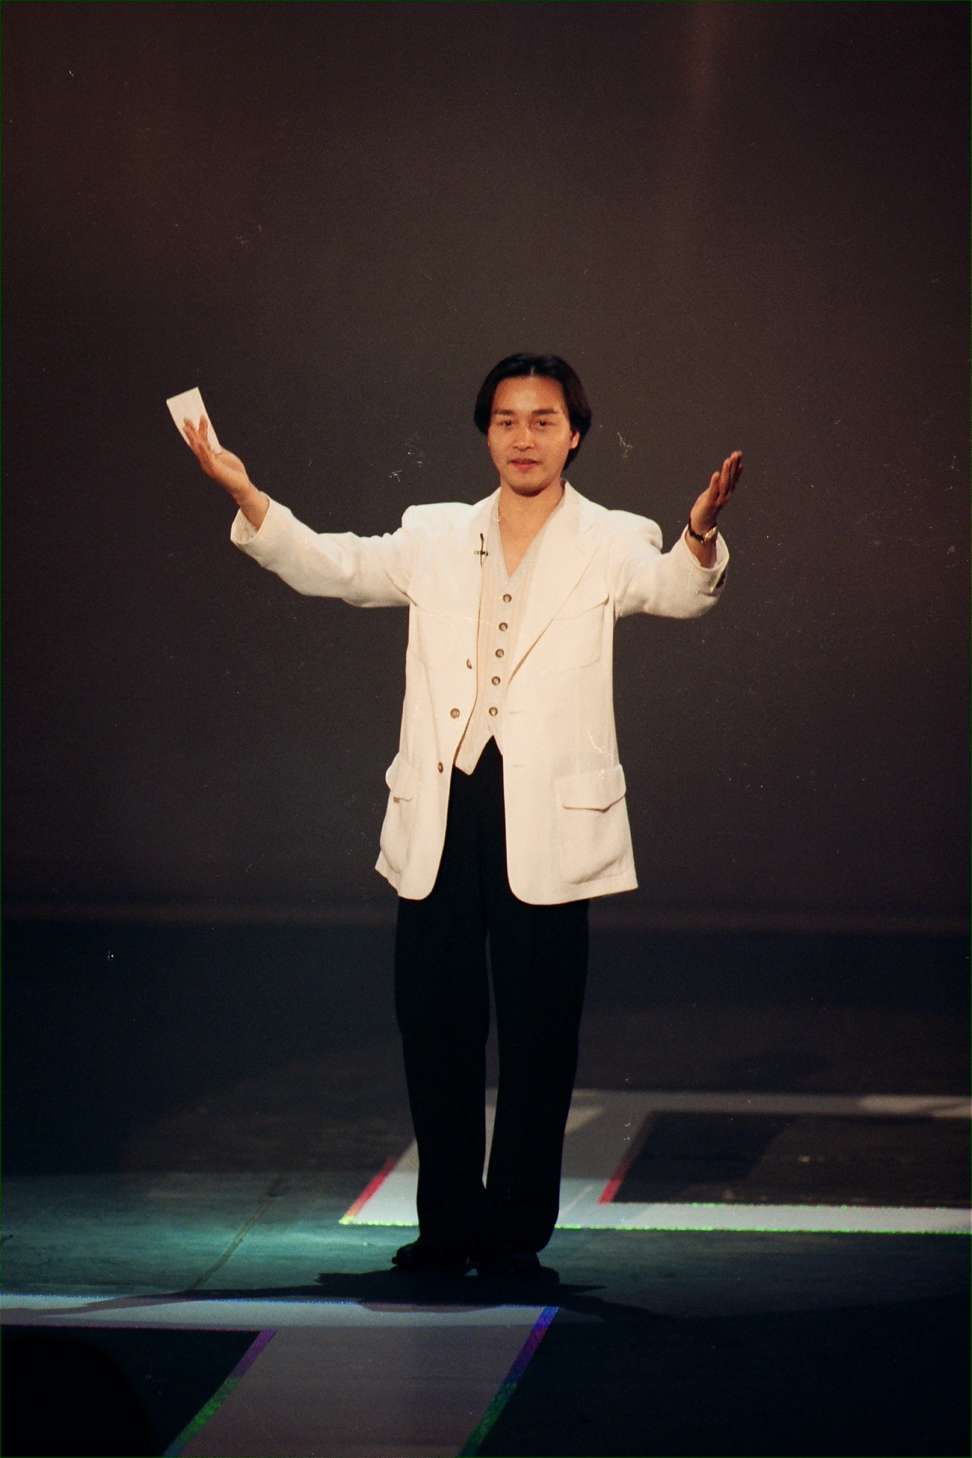 rare photo of Leslie Cheung from the style icon's golden time. South China Morning Post